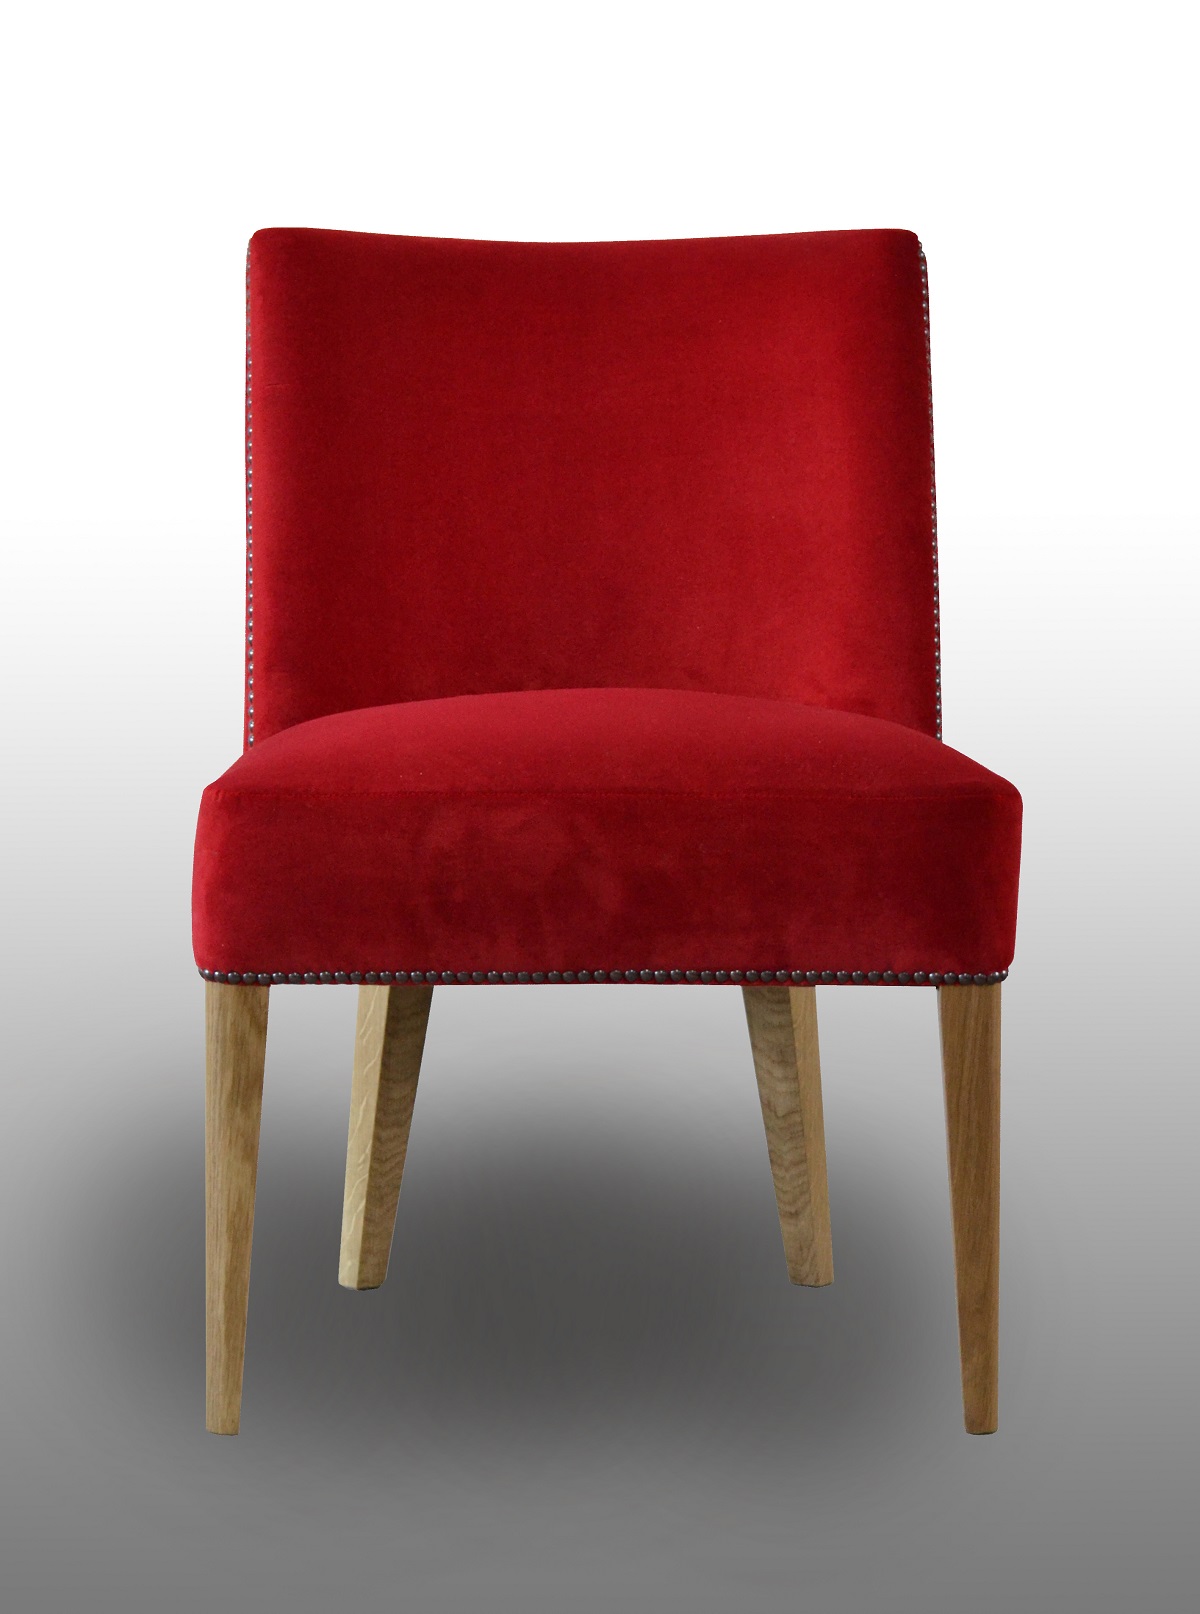 Red Lambert chair with wooden legs seen from the front